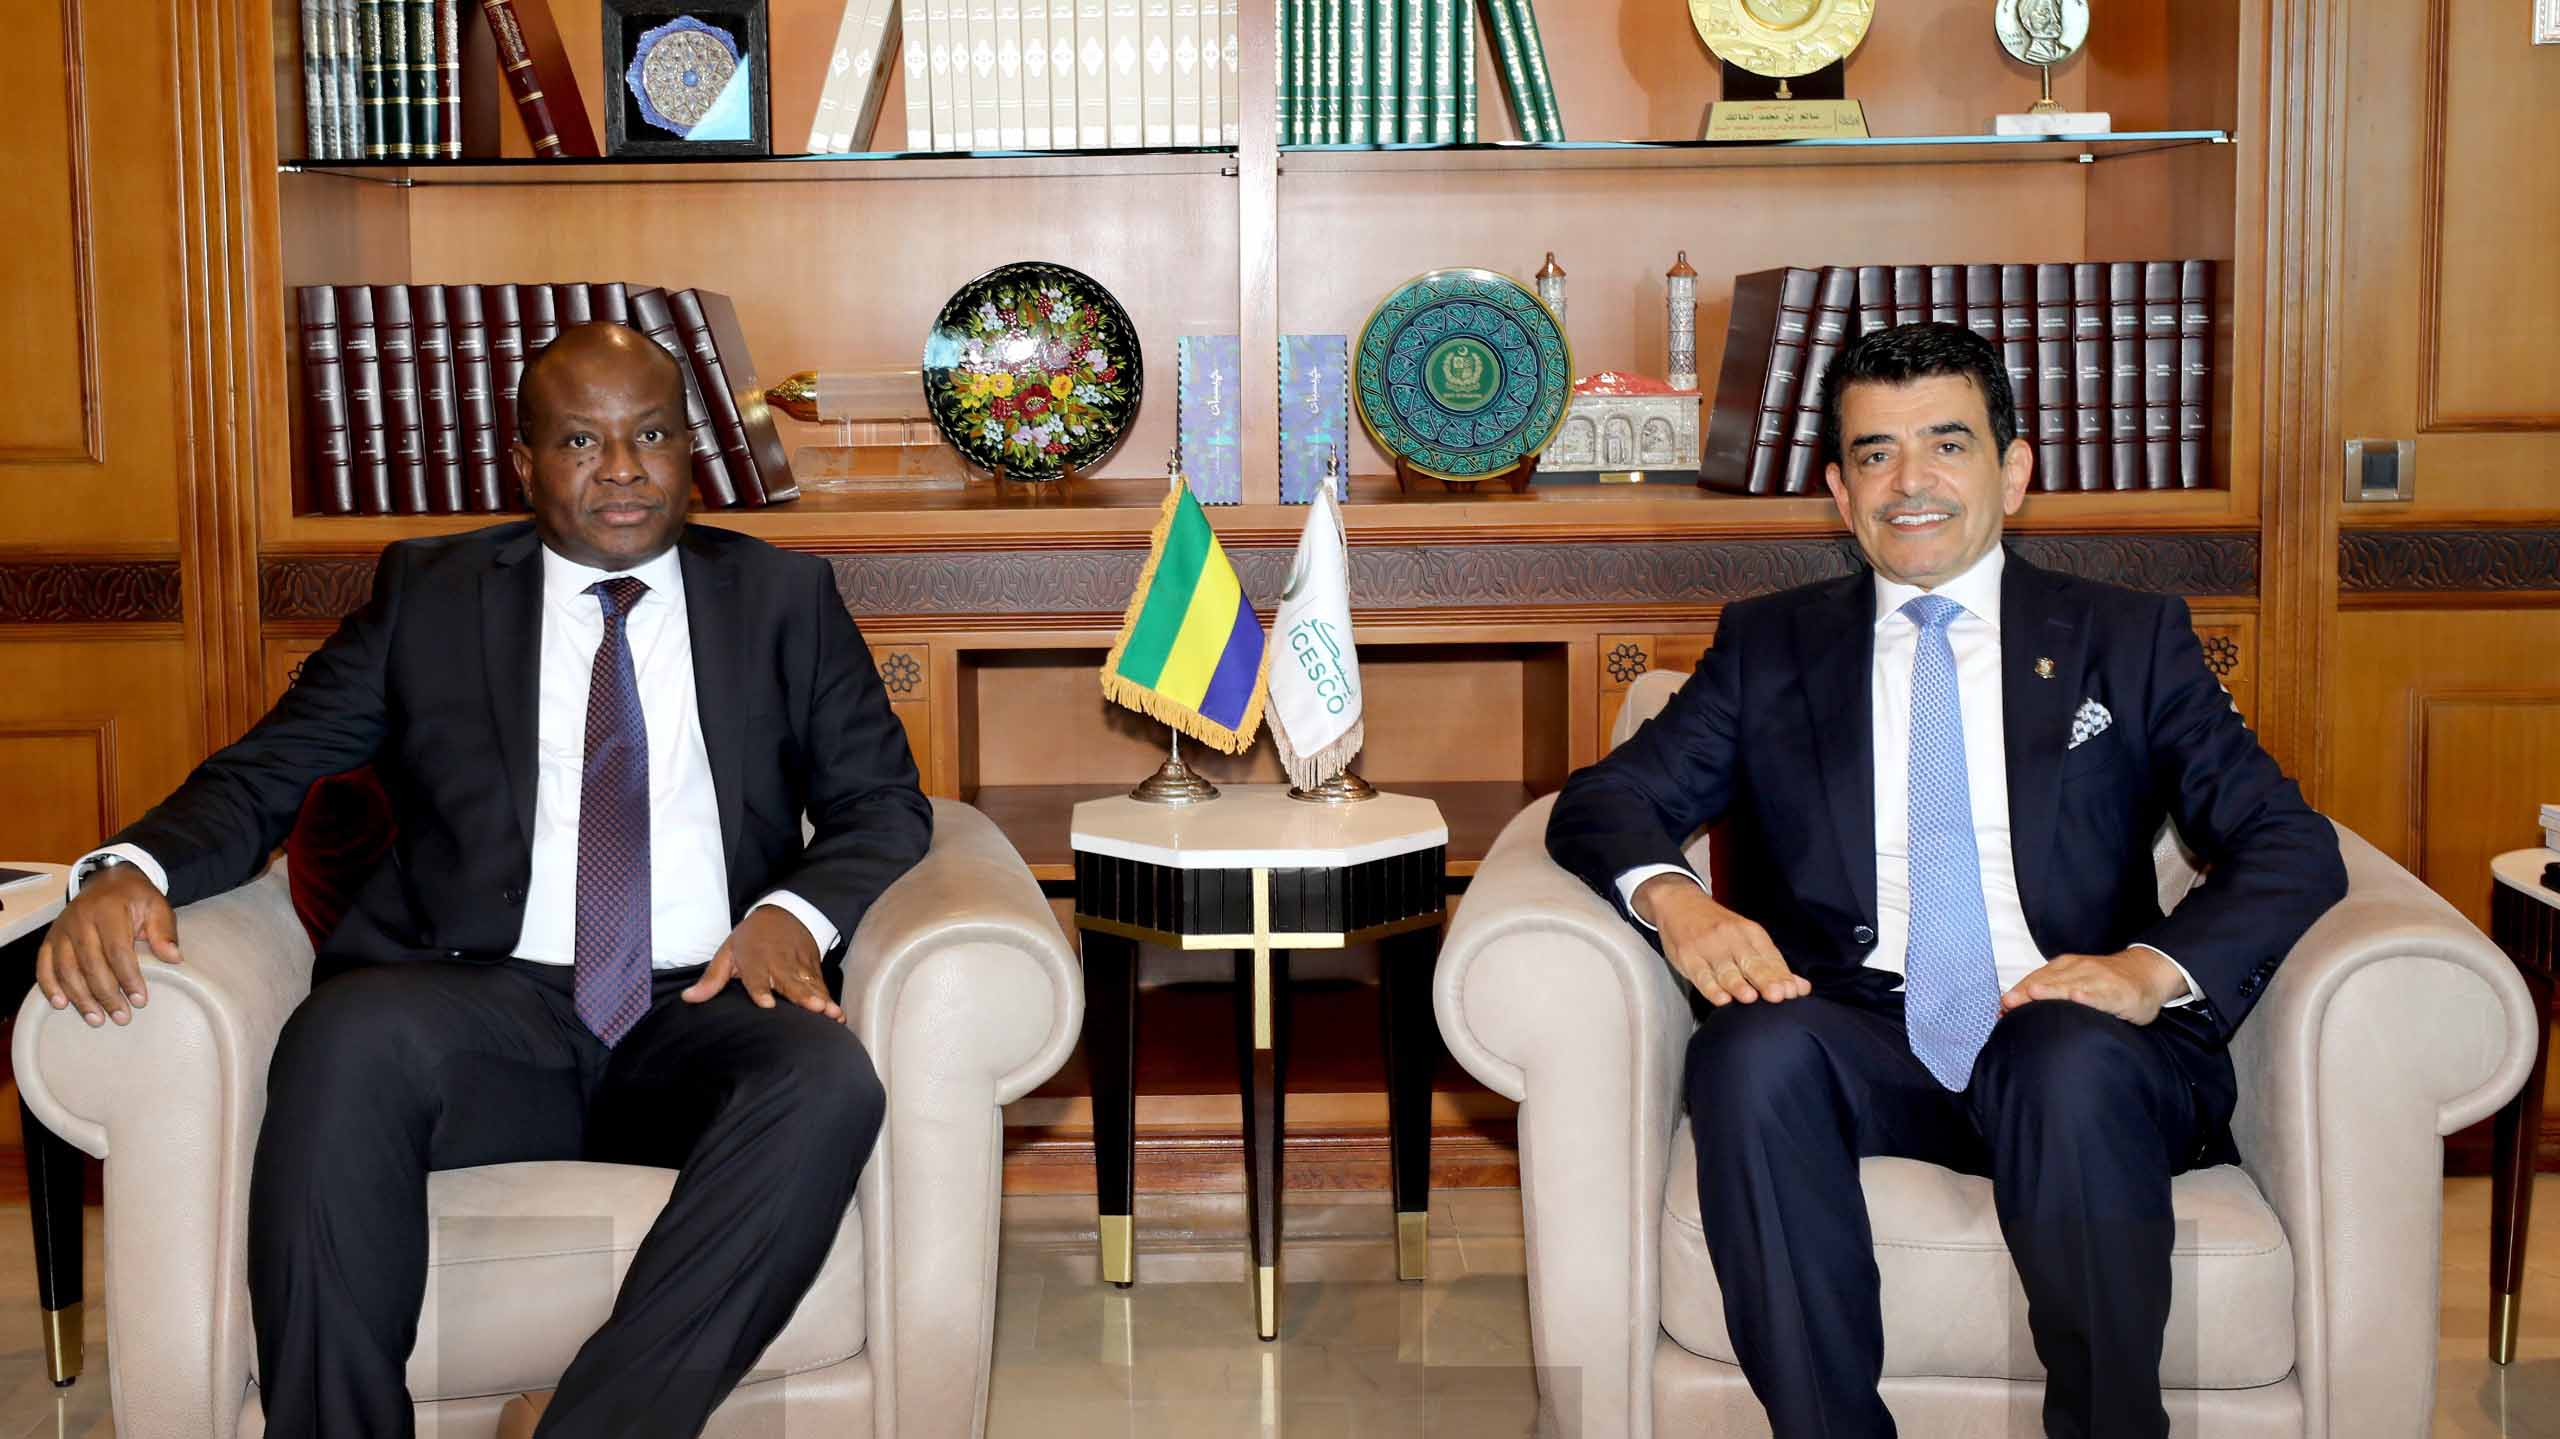 Agreement to develop partnership between ICESCO and Gabon in education, science, and culture